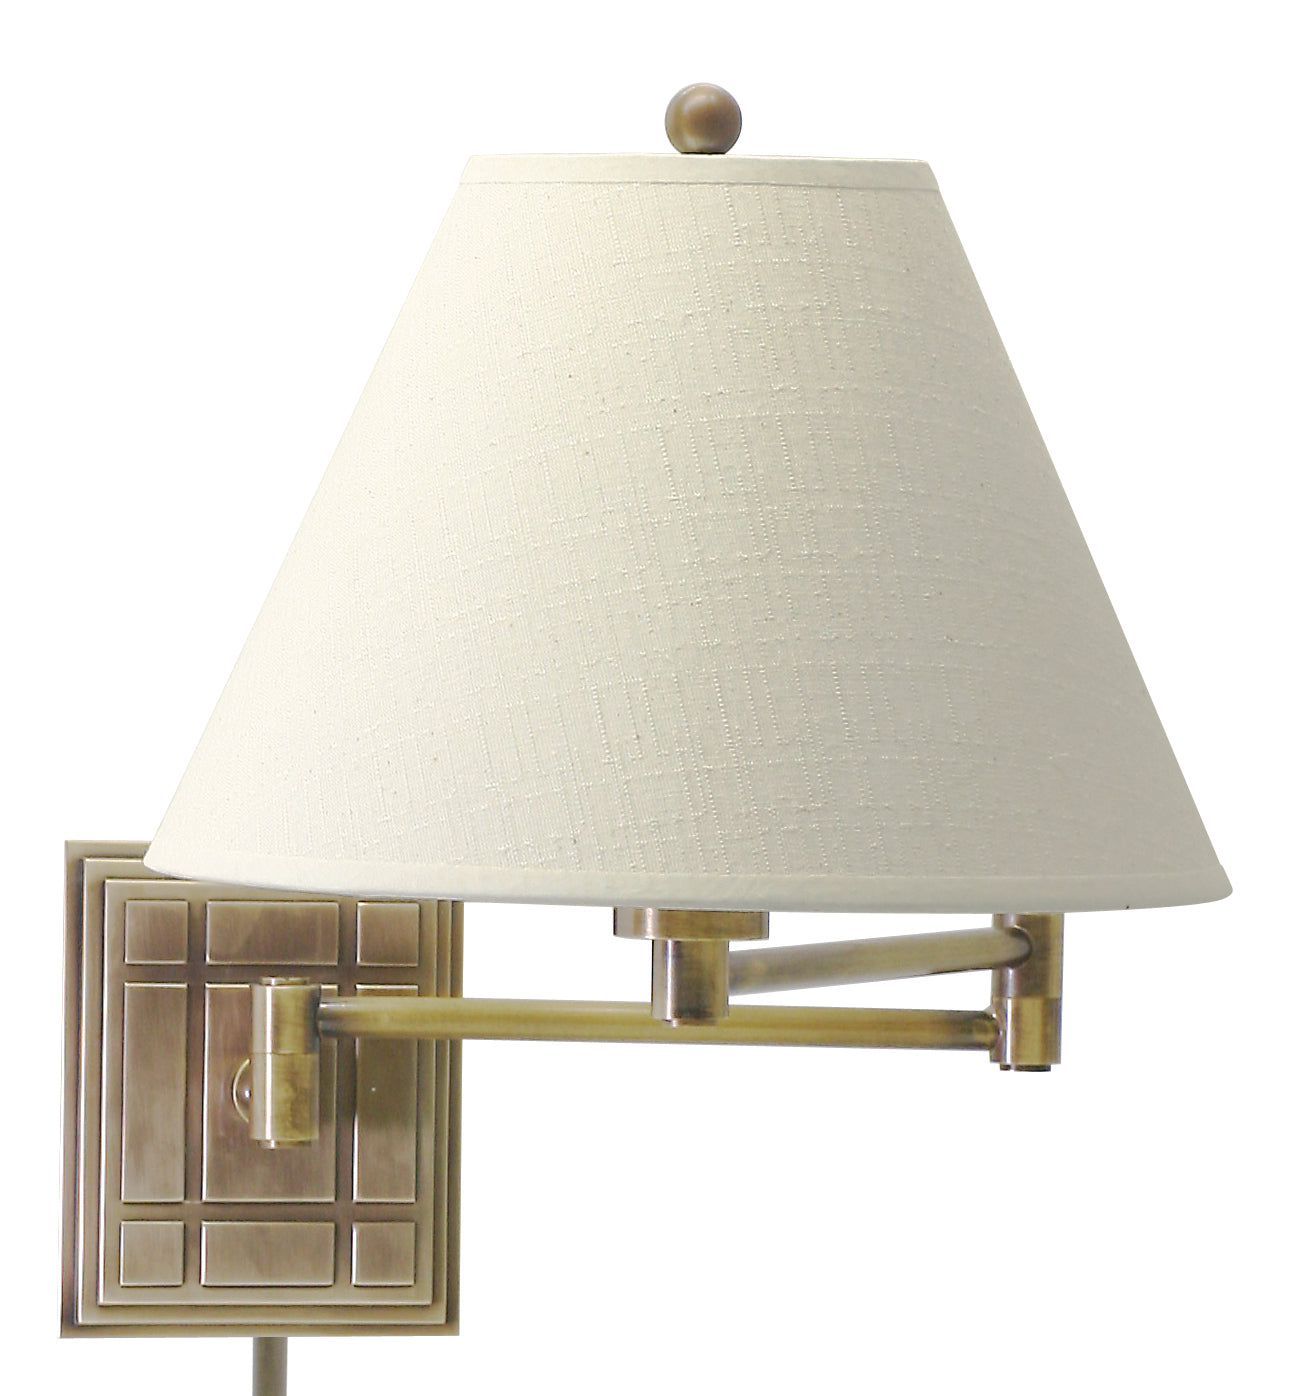 House of Troy Wall Swing Arm Lamp in Antique Brass WS750-AB